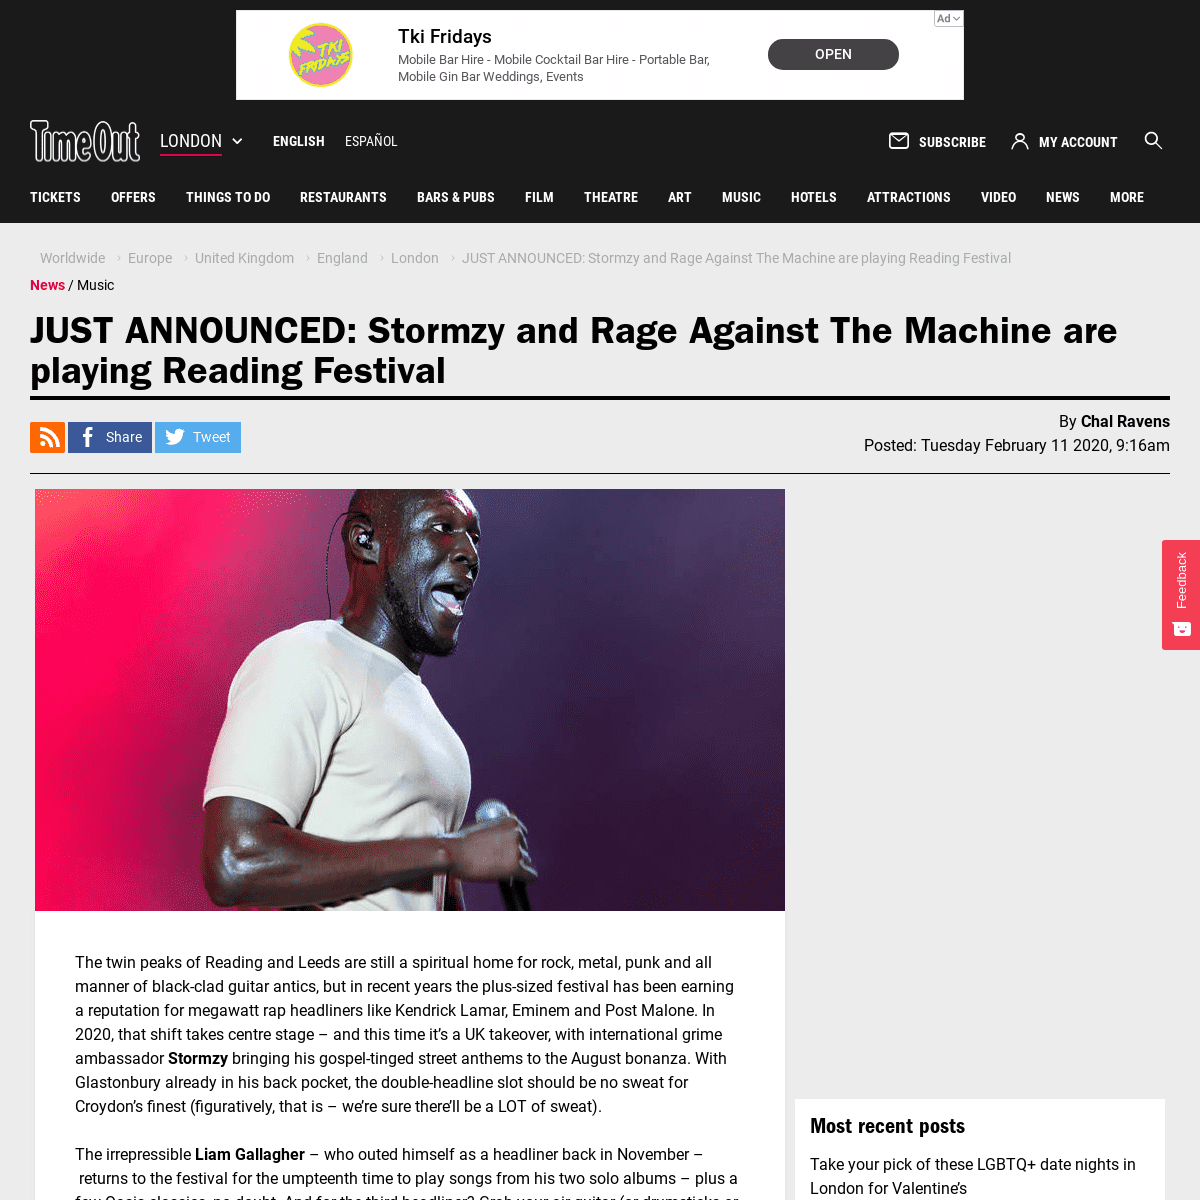 A complete backup of www.timeout.com/london/news/just-announced-stormzy-and-rage-against-the-machine-are-playing-reading-festiva